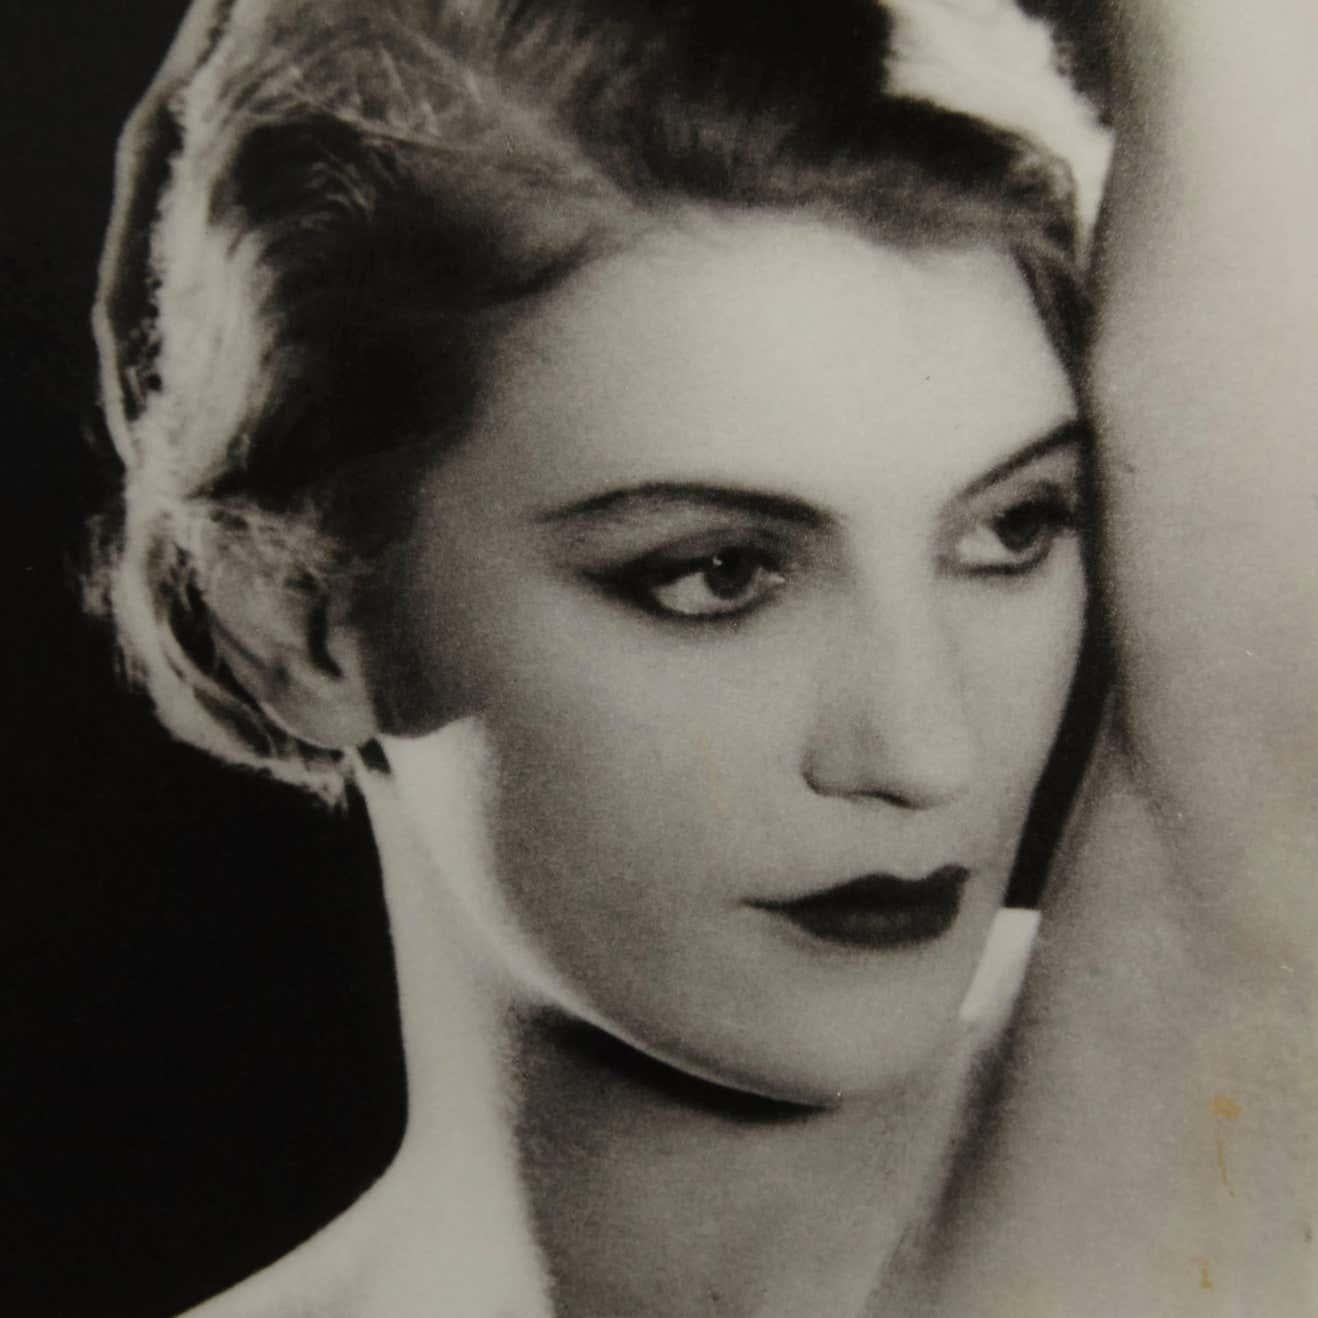 Man Ray contretype of Lee Miller, 1930.

Framed on a 19th century frame with museum glass.

Man Ray (1890–1976) was an American visual artist who spent most of his career in France. He was a significant contributor to the Dada and Surrealist